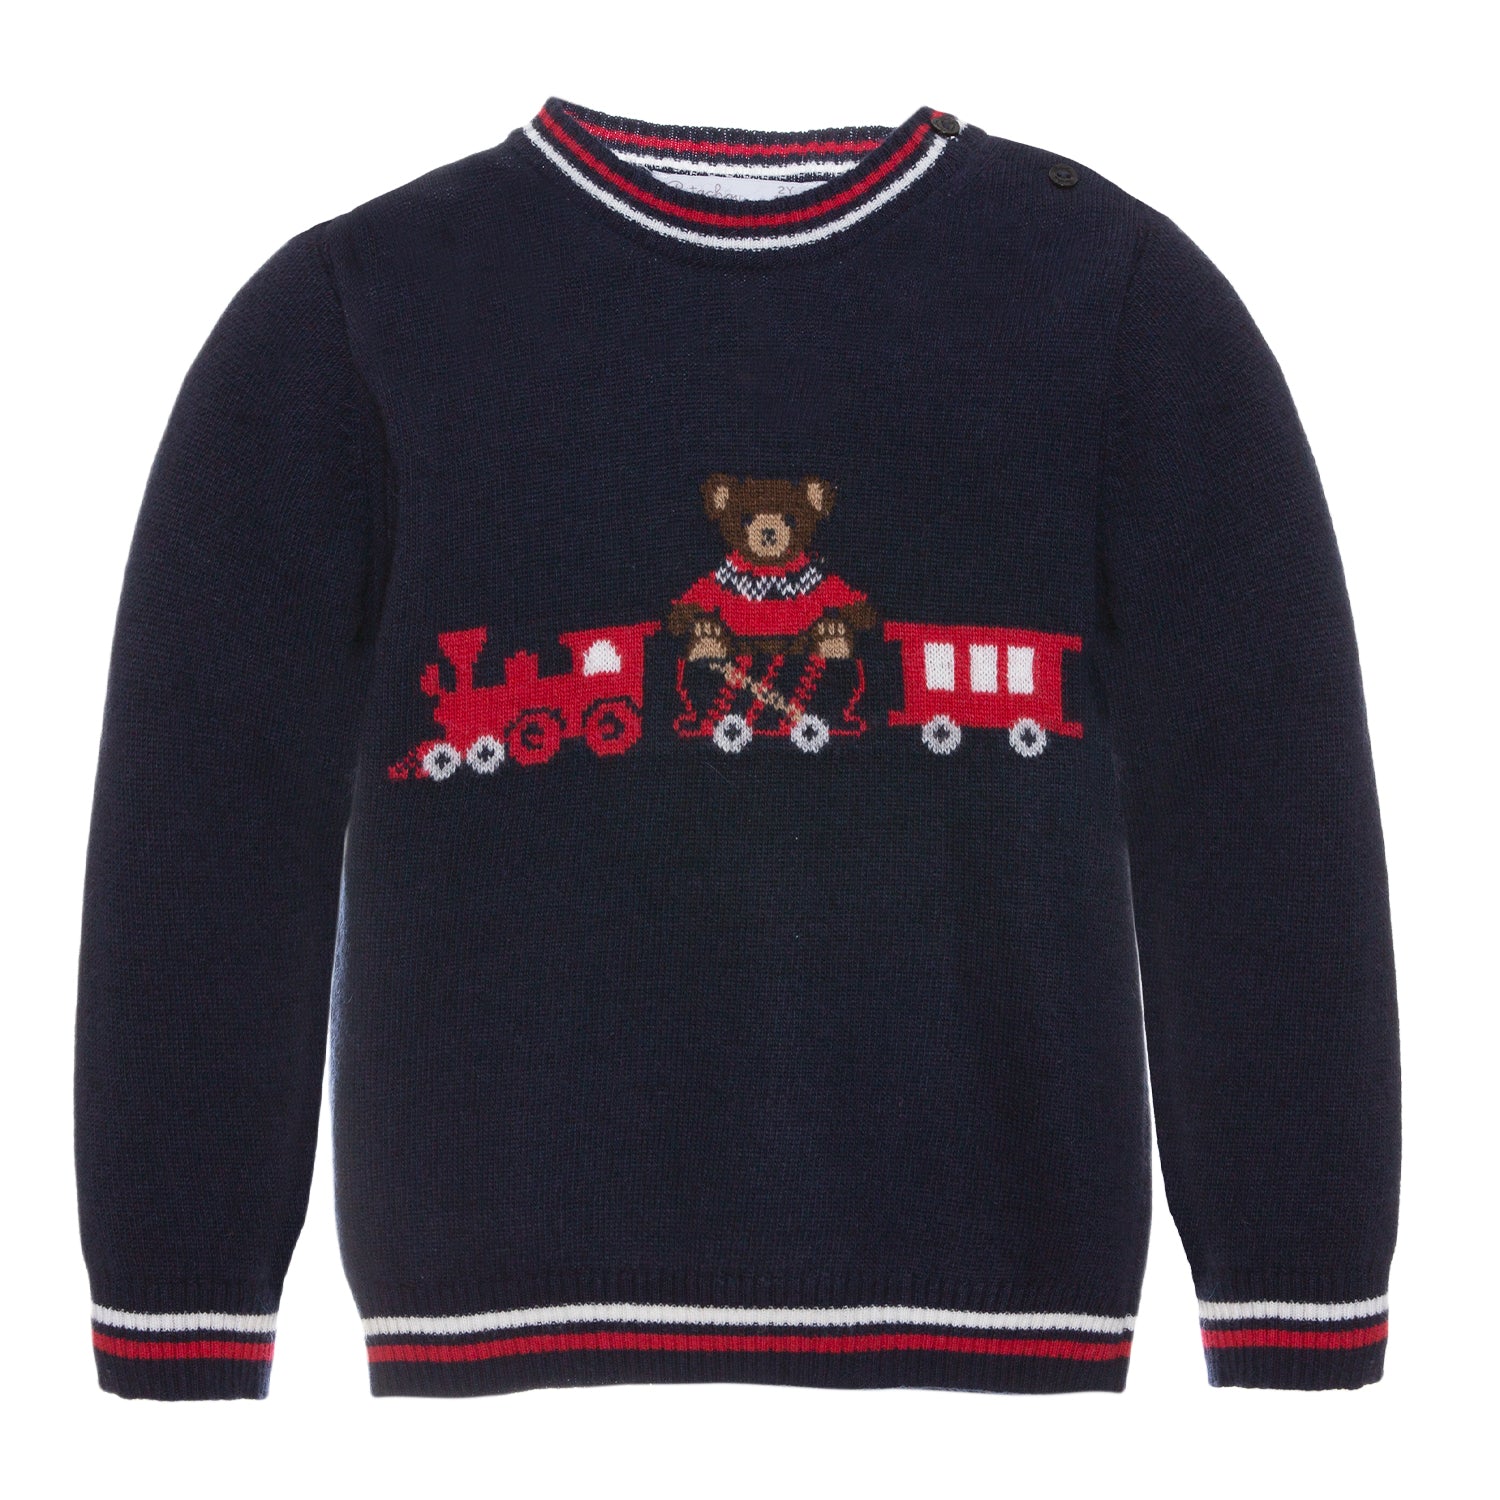 Boys Knitted Train Sweater